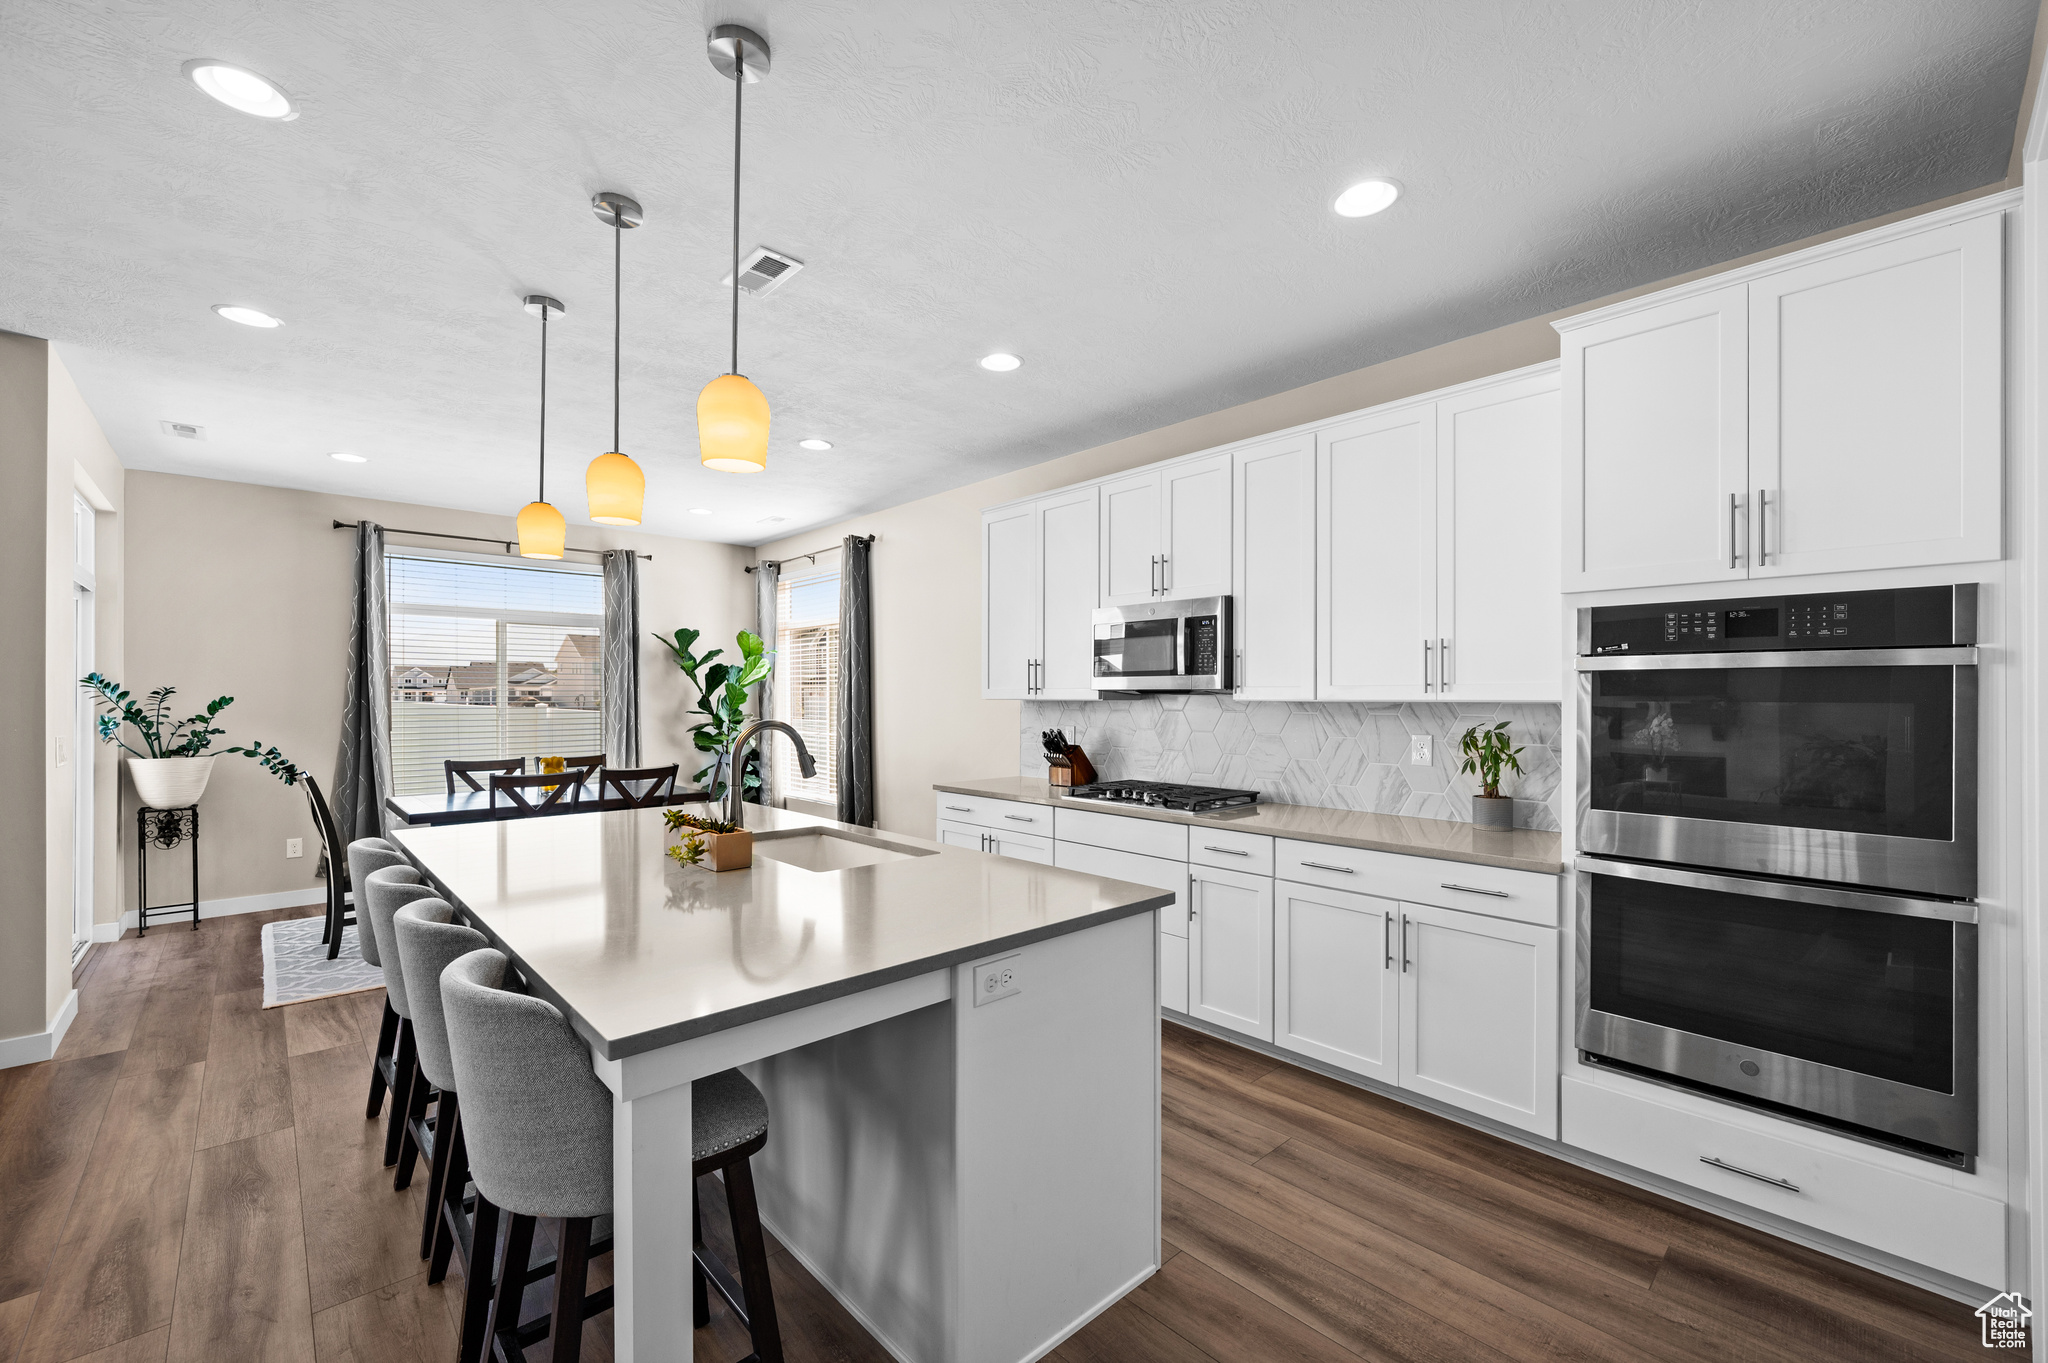 Large chef's Kitchen featuring white cabinets, pendant lighting,  appliances with stainless steel finishes.